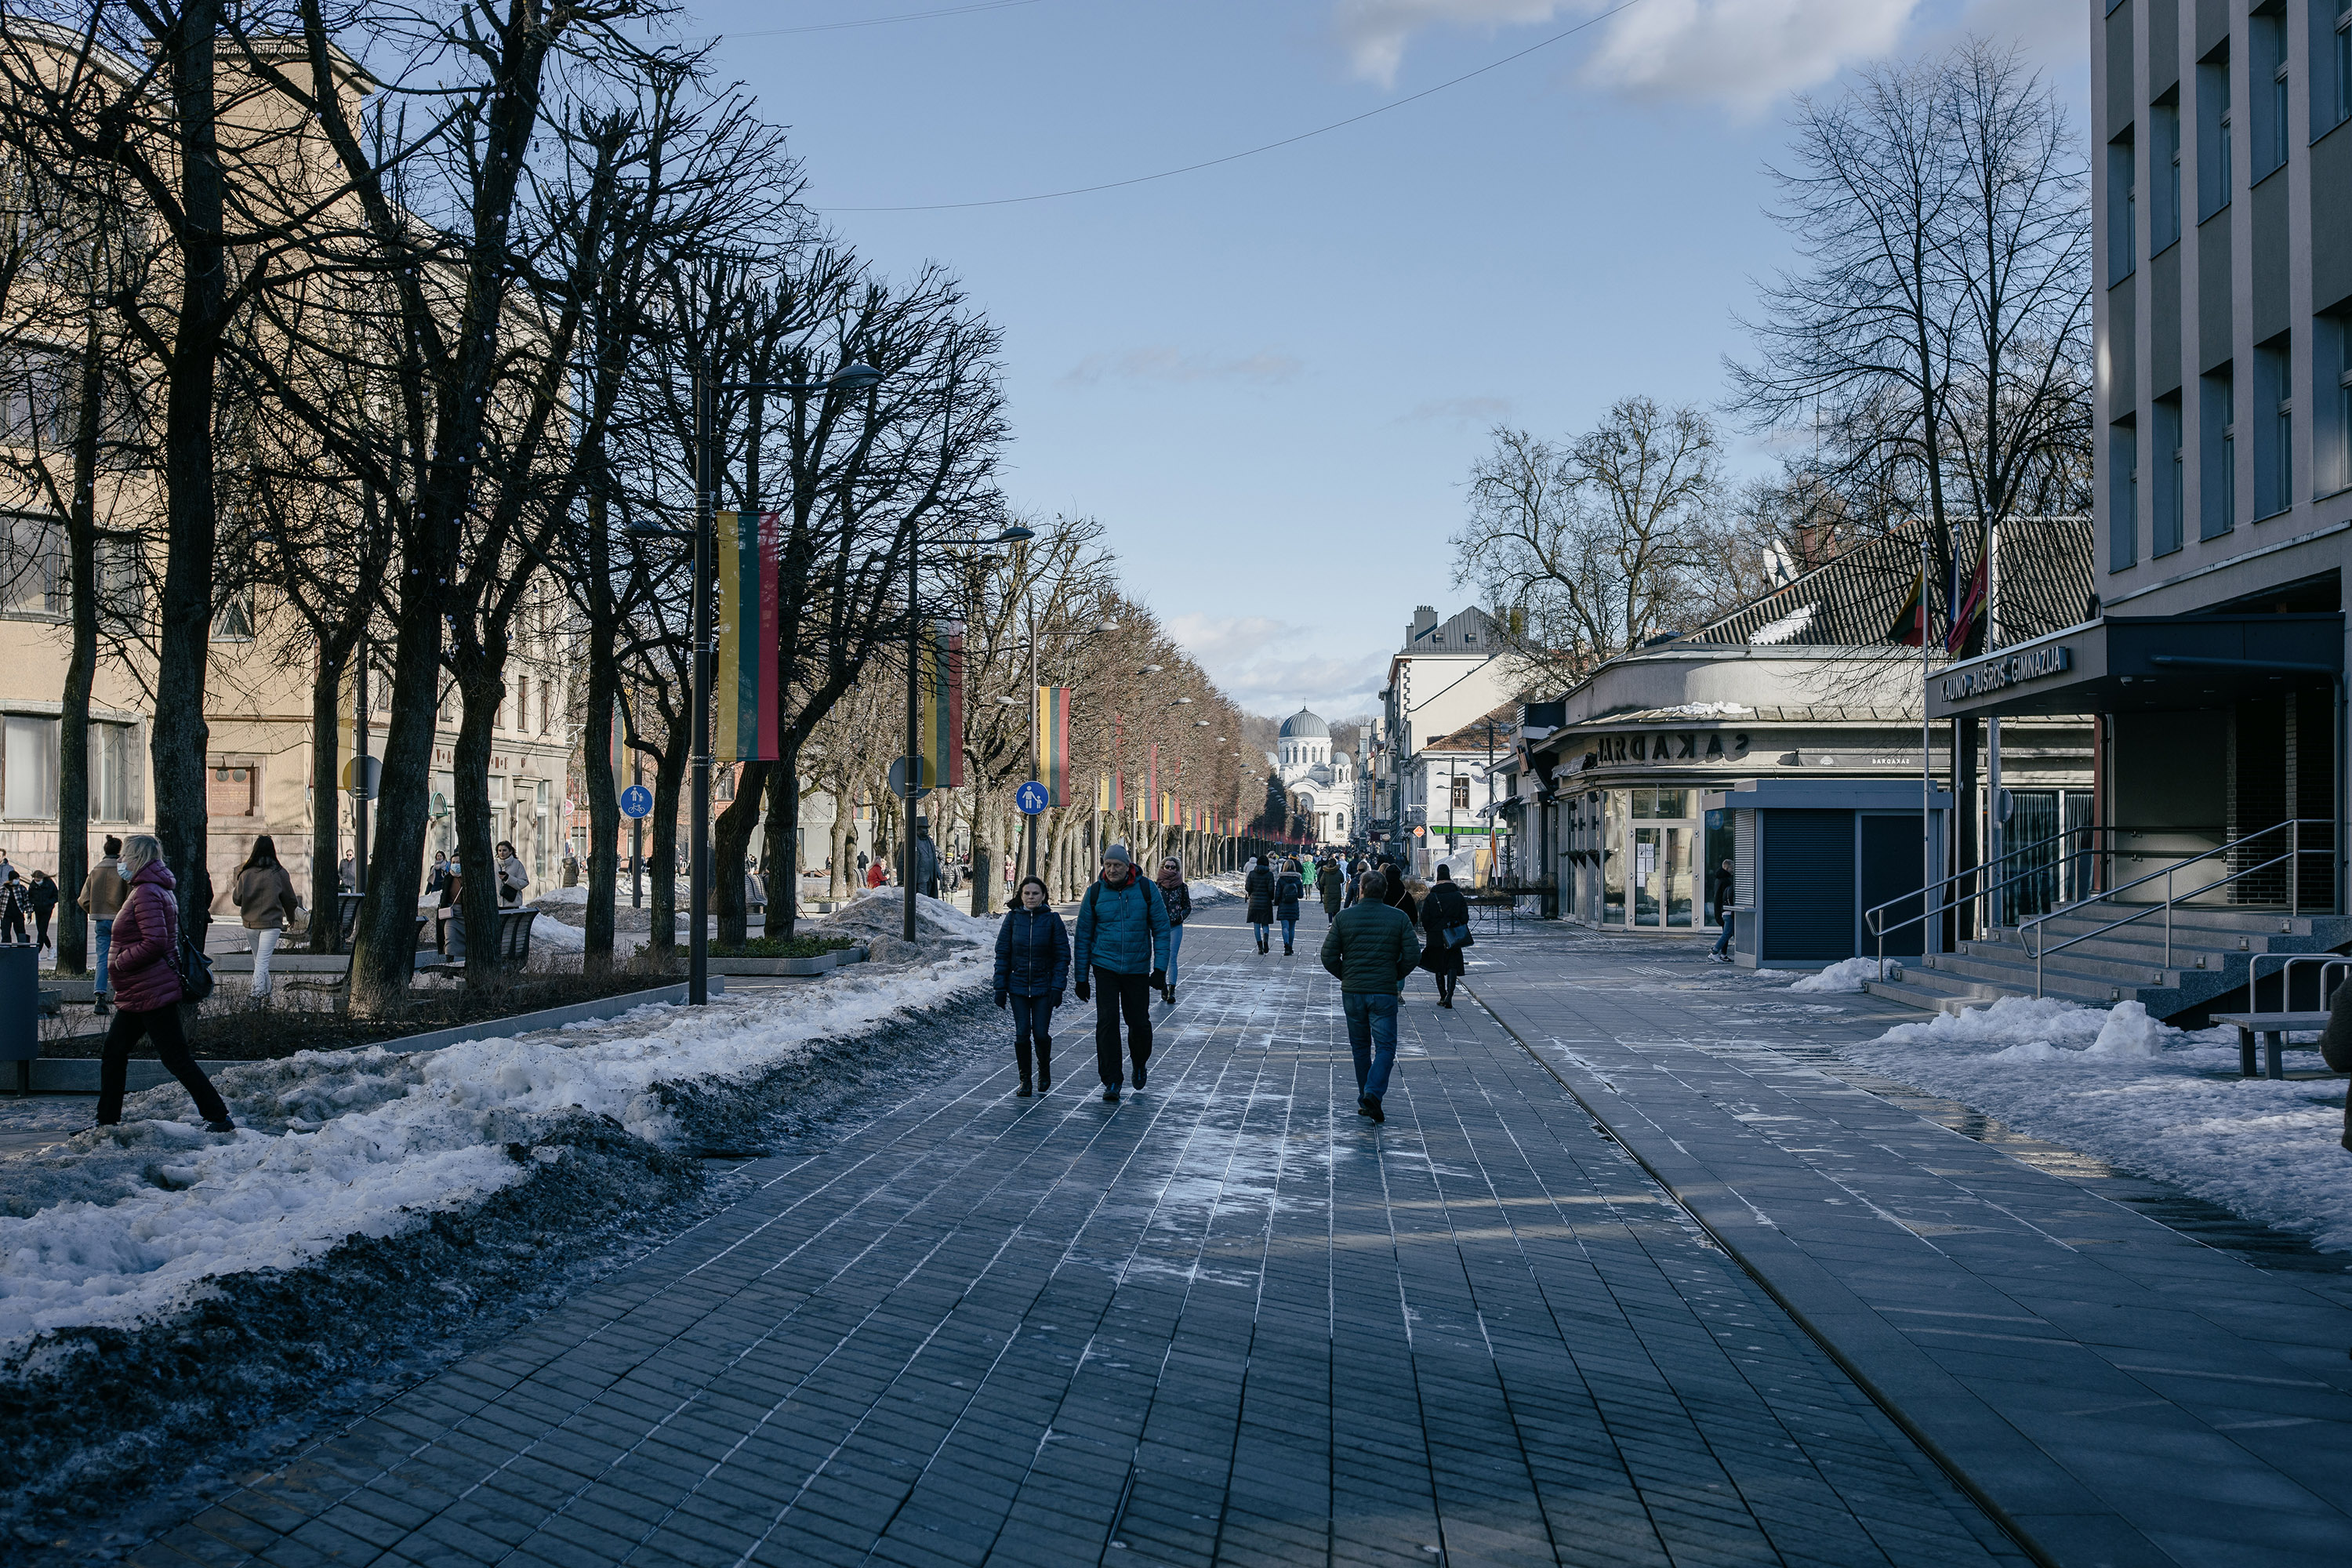 Liberty Avenue in Kaunas, Lithuania, during the February the 16th, the Independence day. Shot at f4